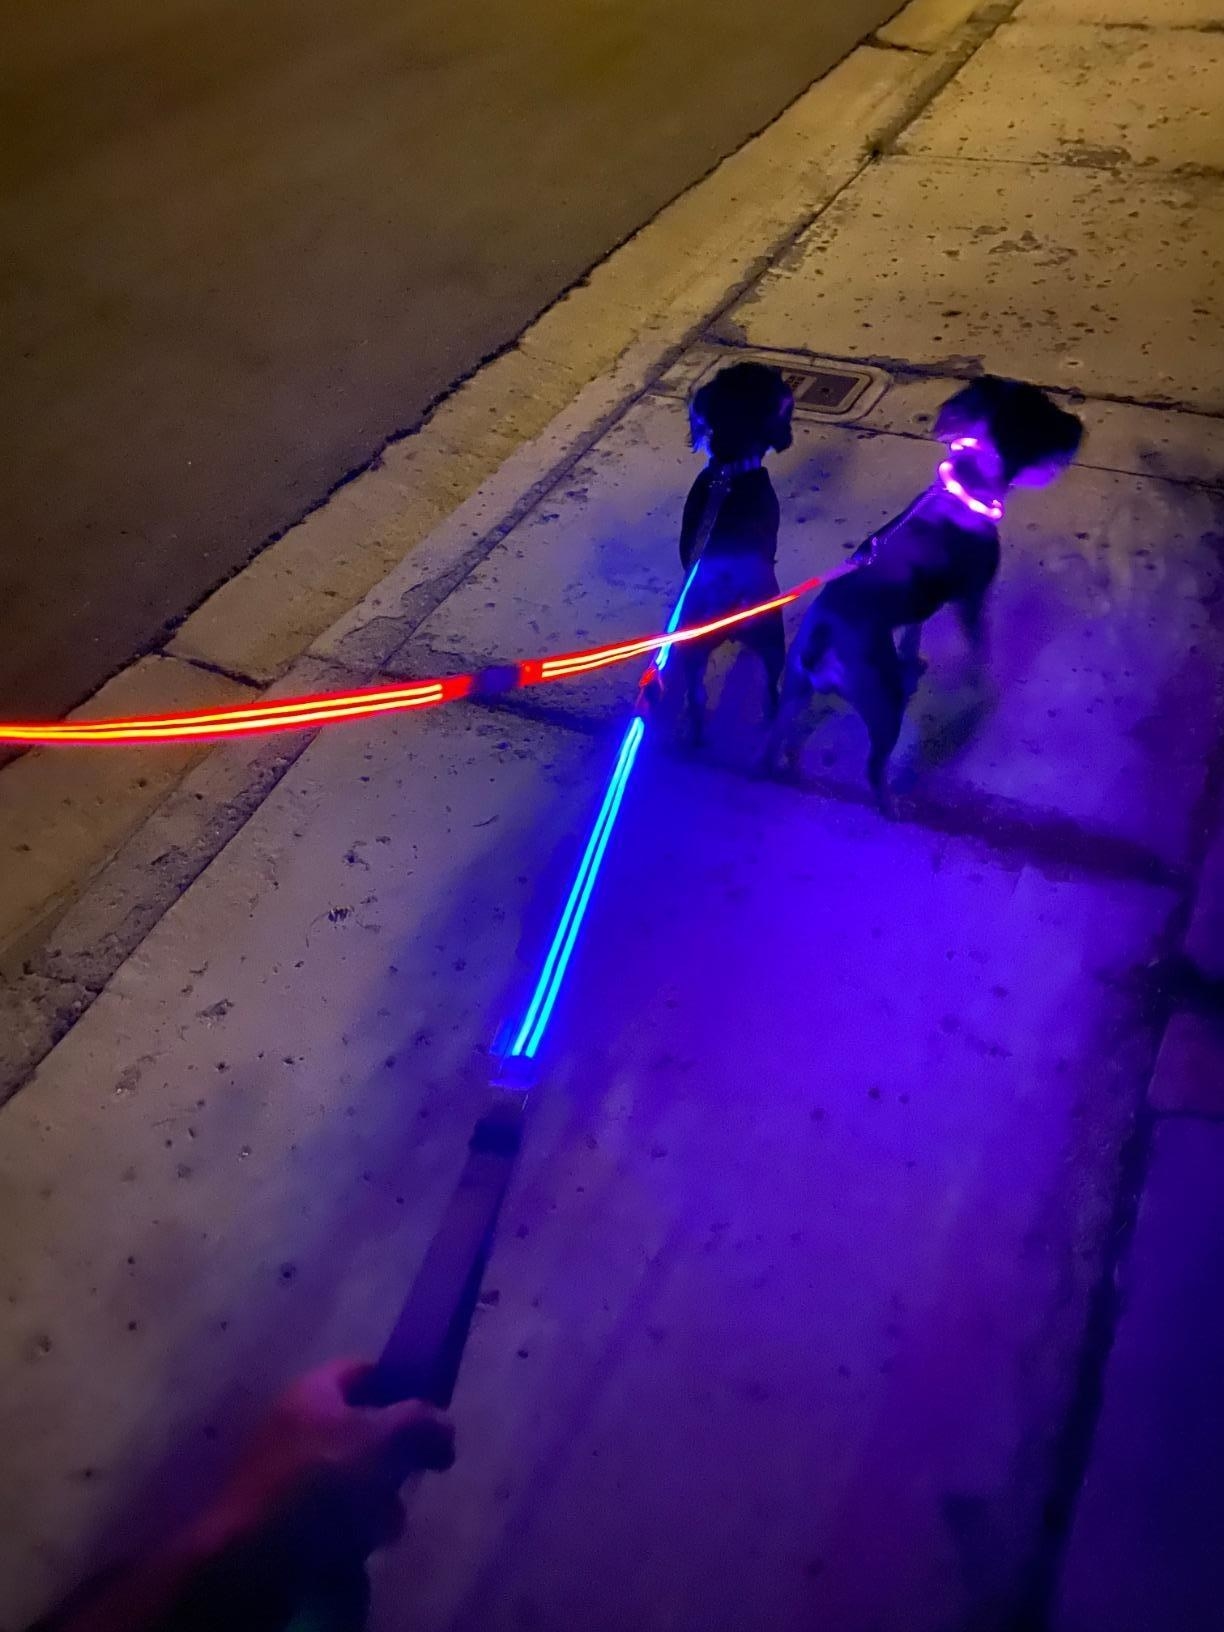 The leash, which has two lines of glowing material stretching from the handle to the collar